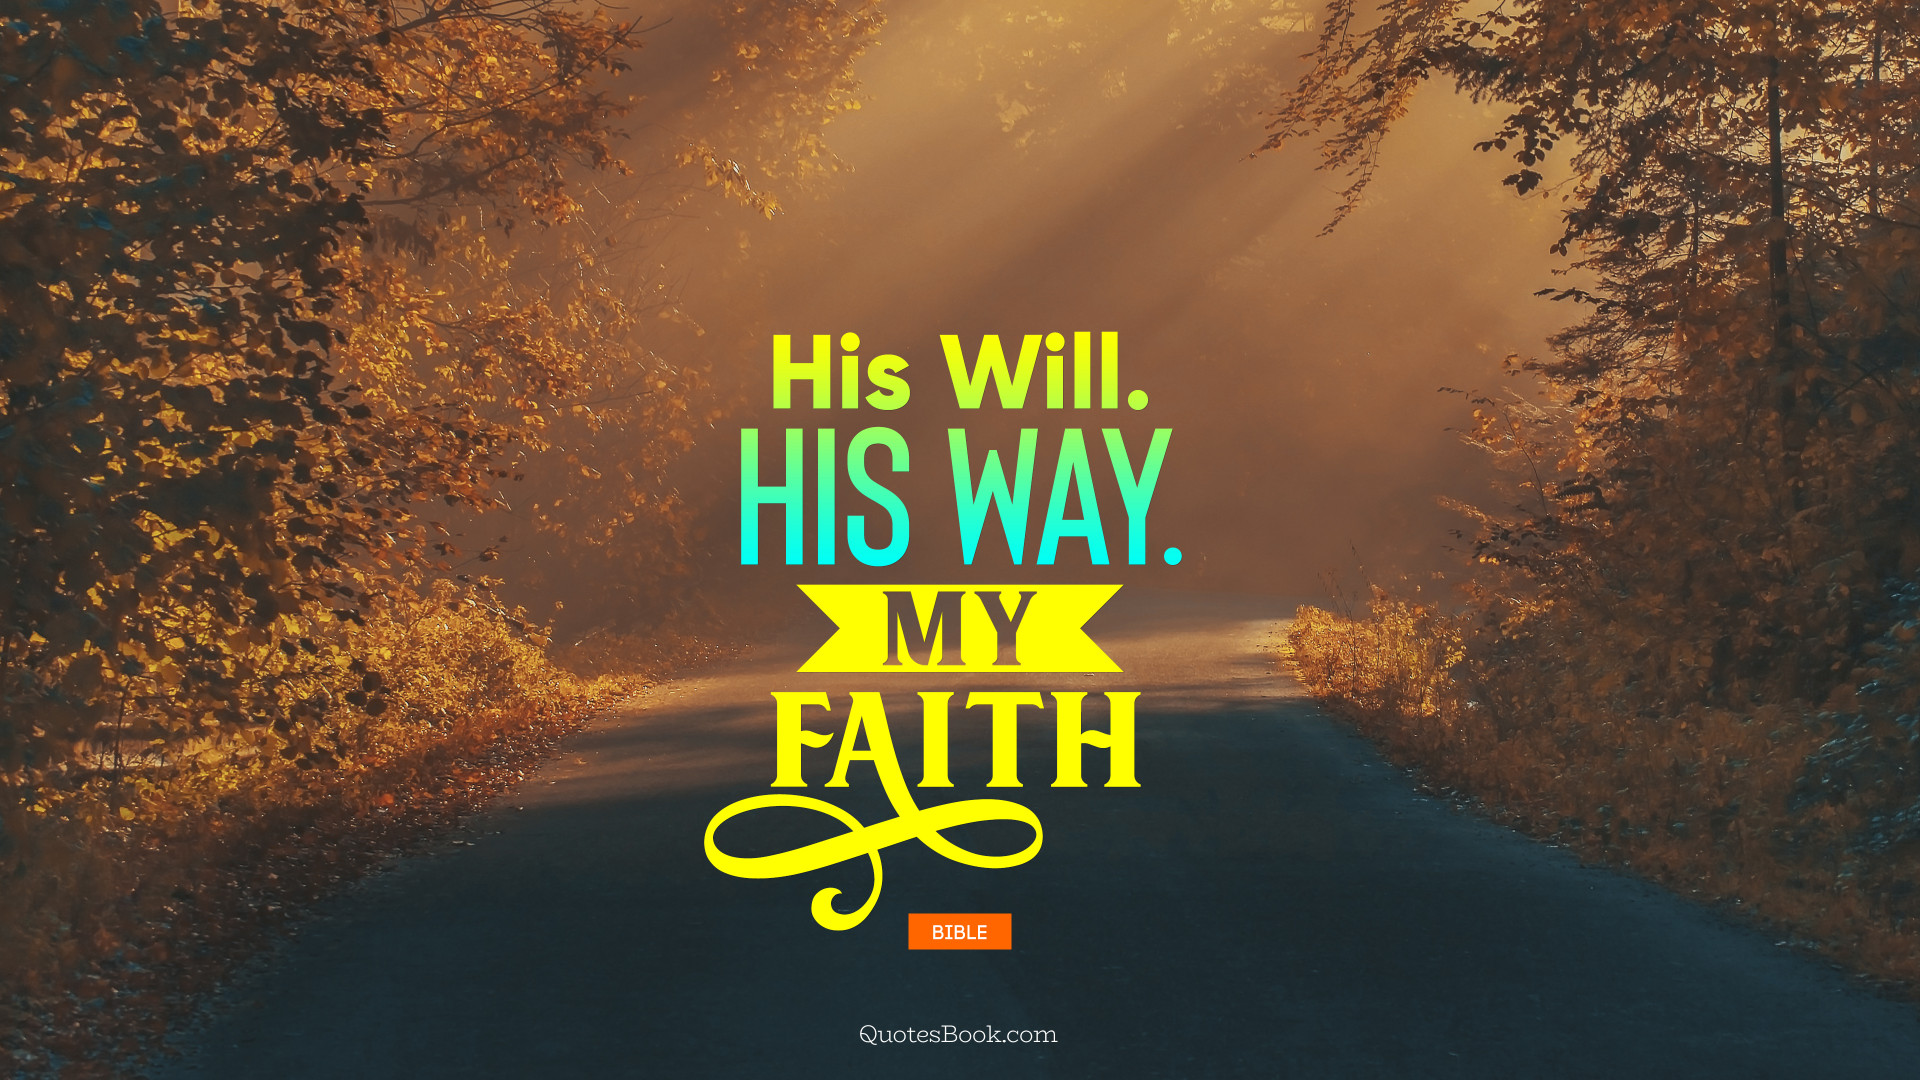 His will. His way. My faith. - Quote by Bible - QuotesBook